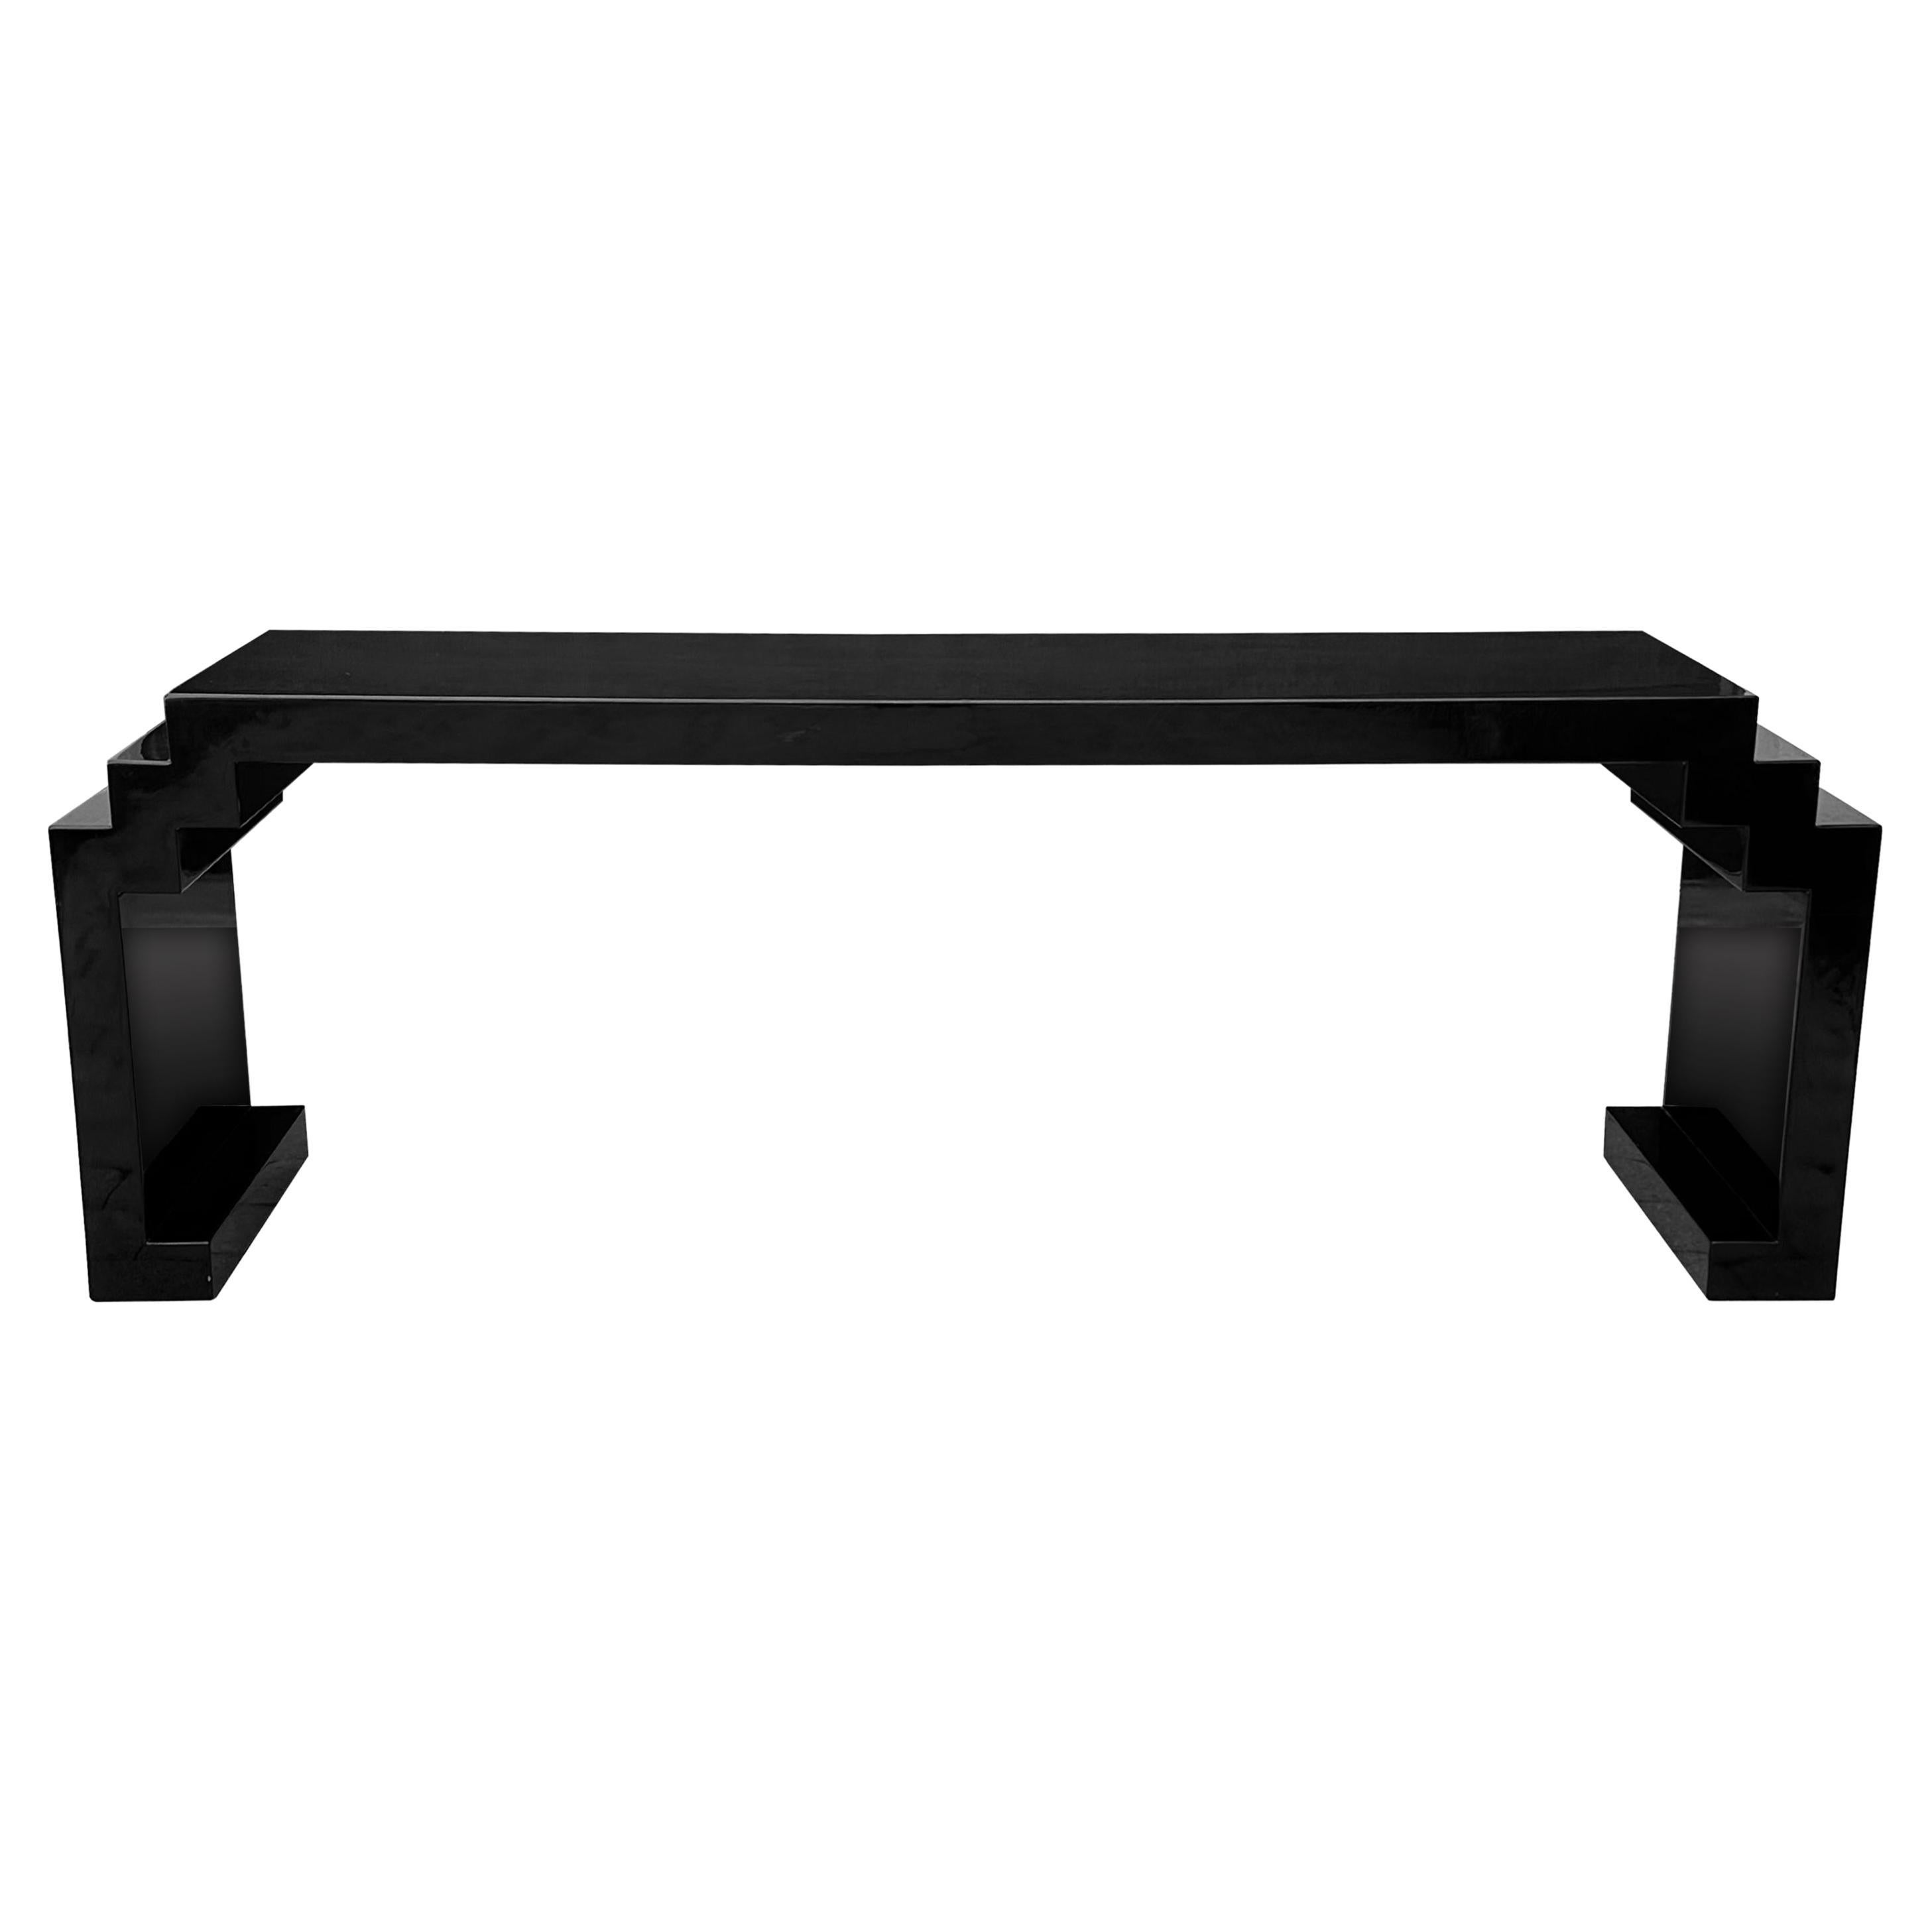 1980s Post Modern Console Table Karl Springer Style